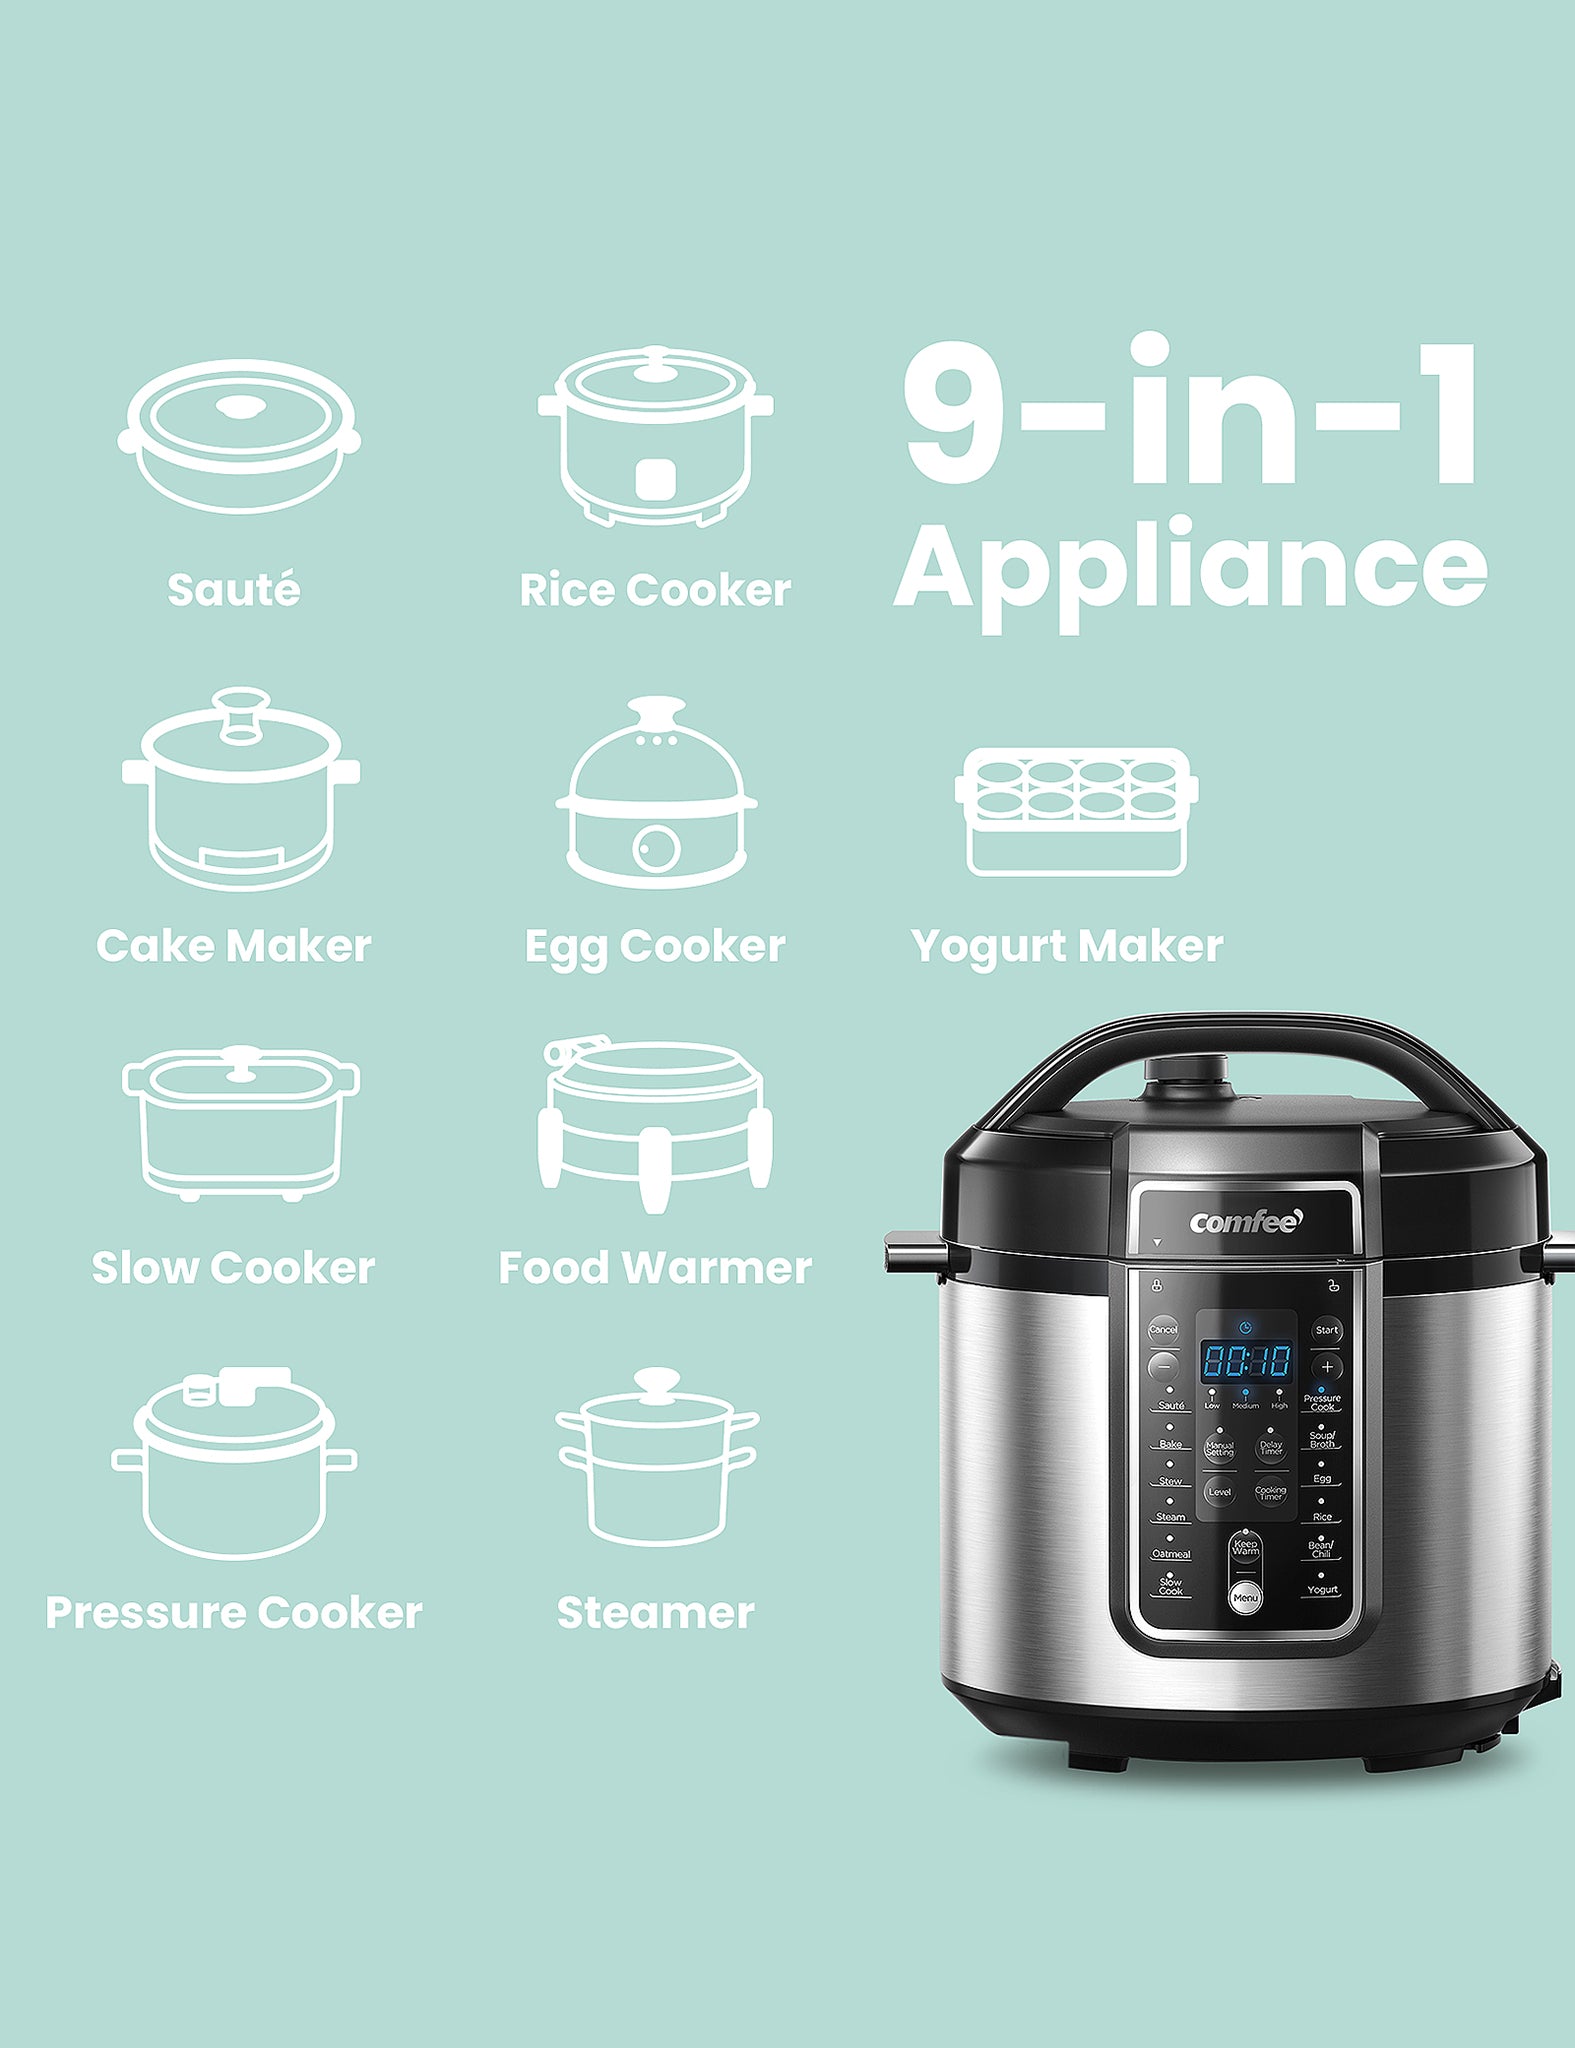 how the comfee electric pressure cooker replaces other cooking appliances